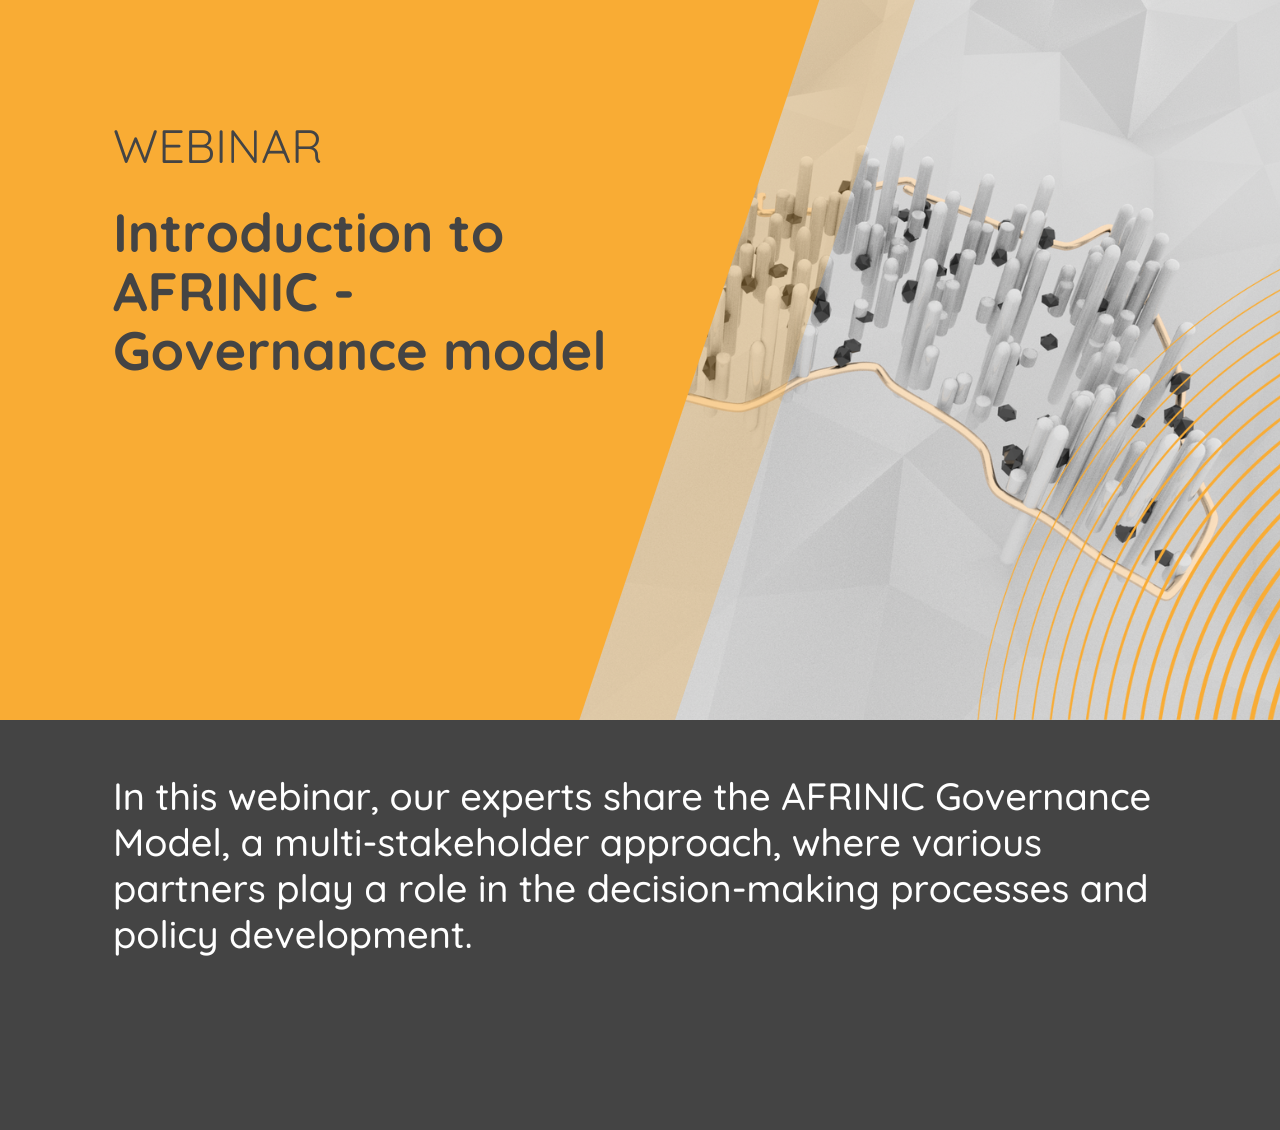 Introduction to AFRINIC Governance Model